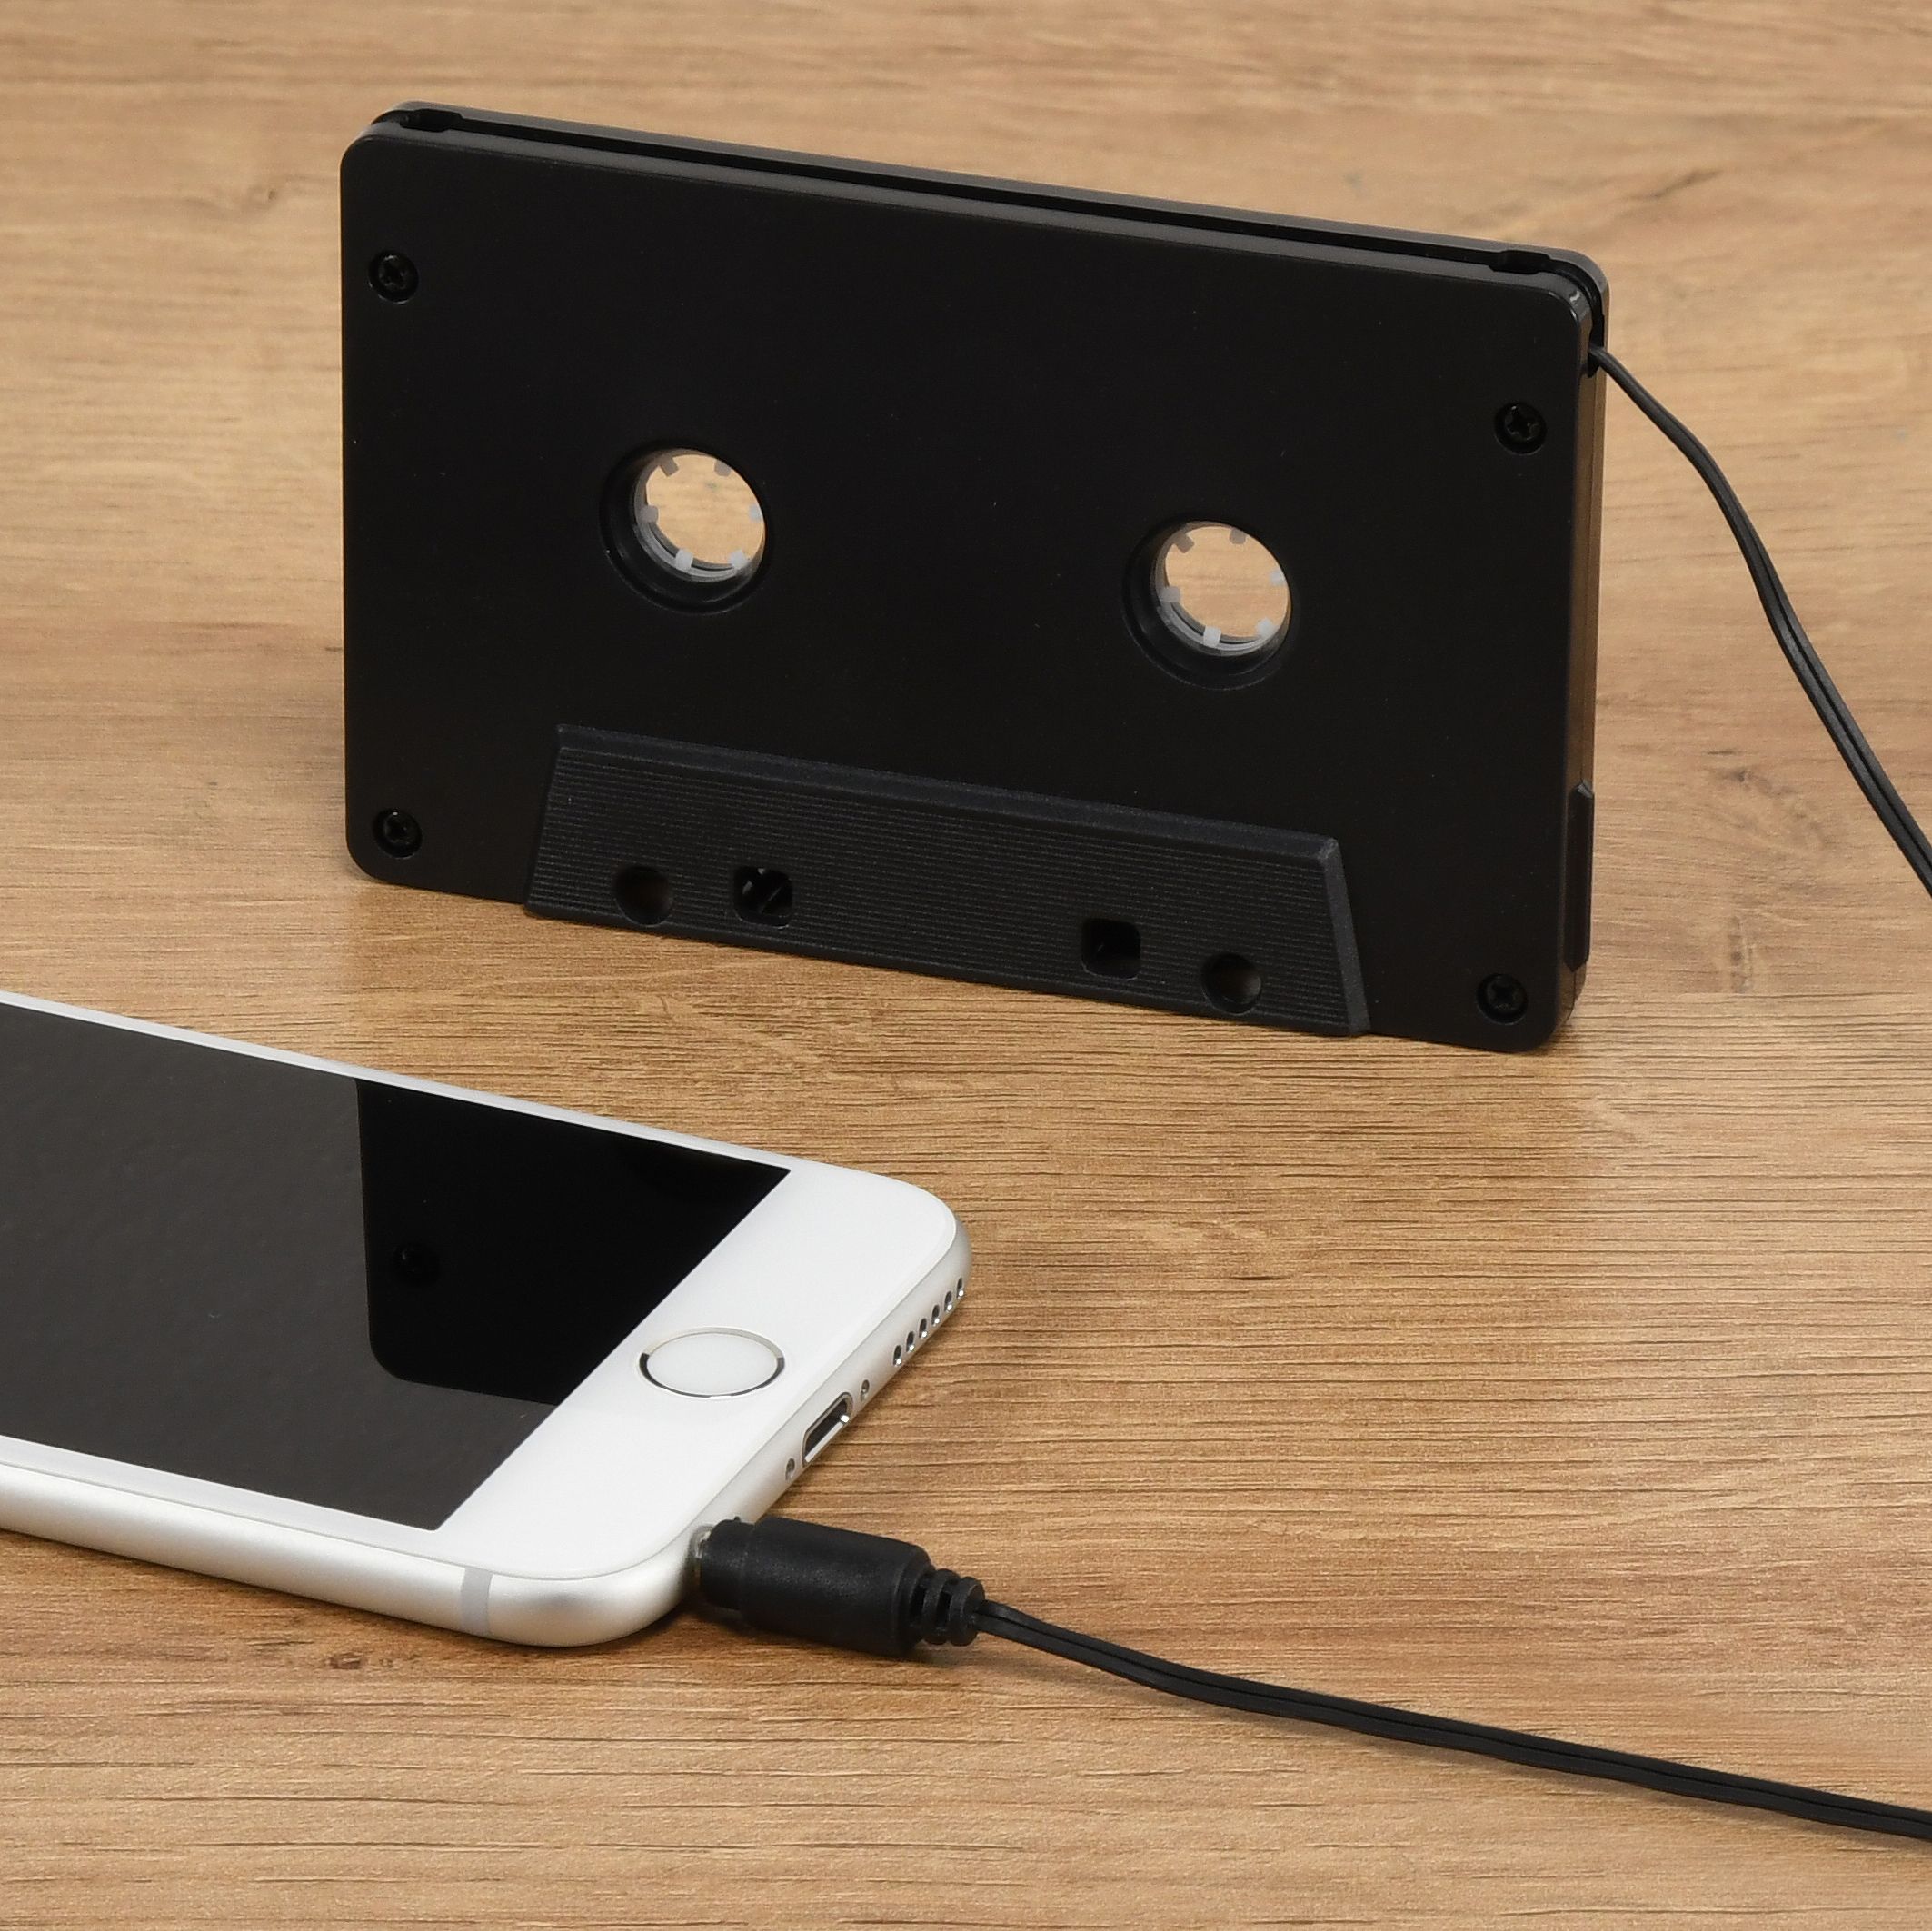 Onn Cassette Adapter - Turn Any Tapedeck Stereo System Into a Digital Media Player - image 4 of 5